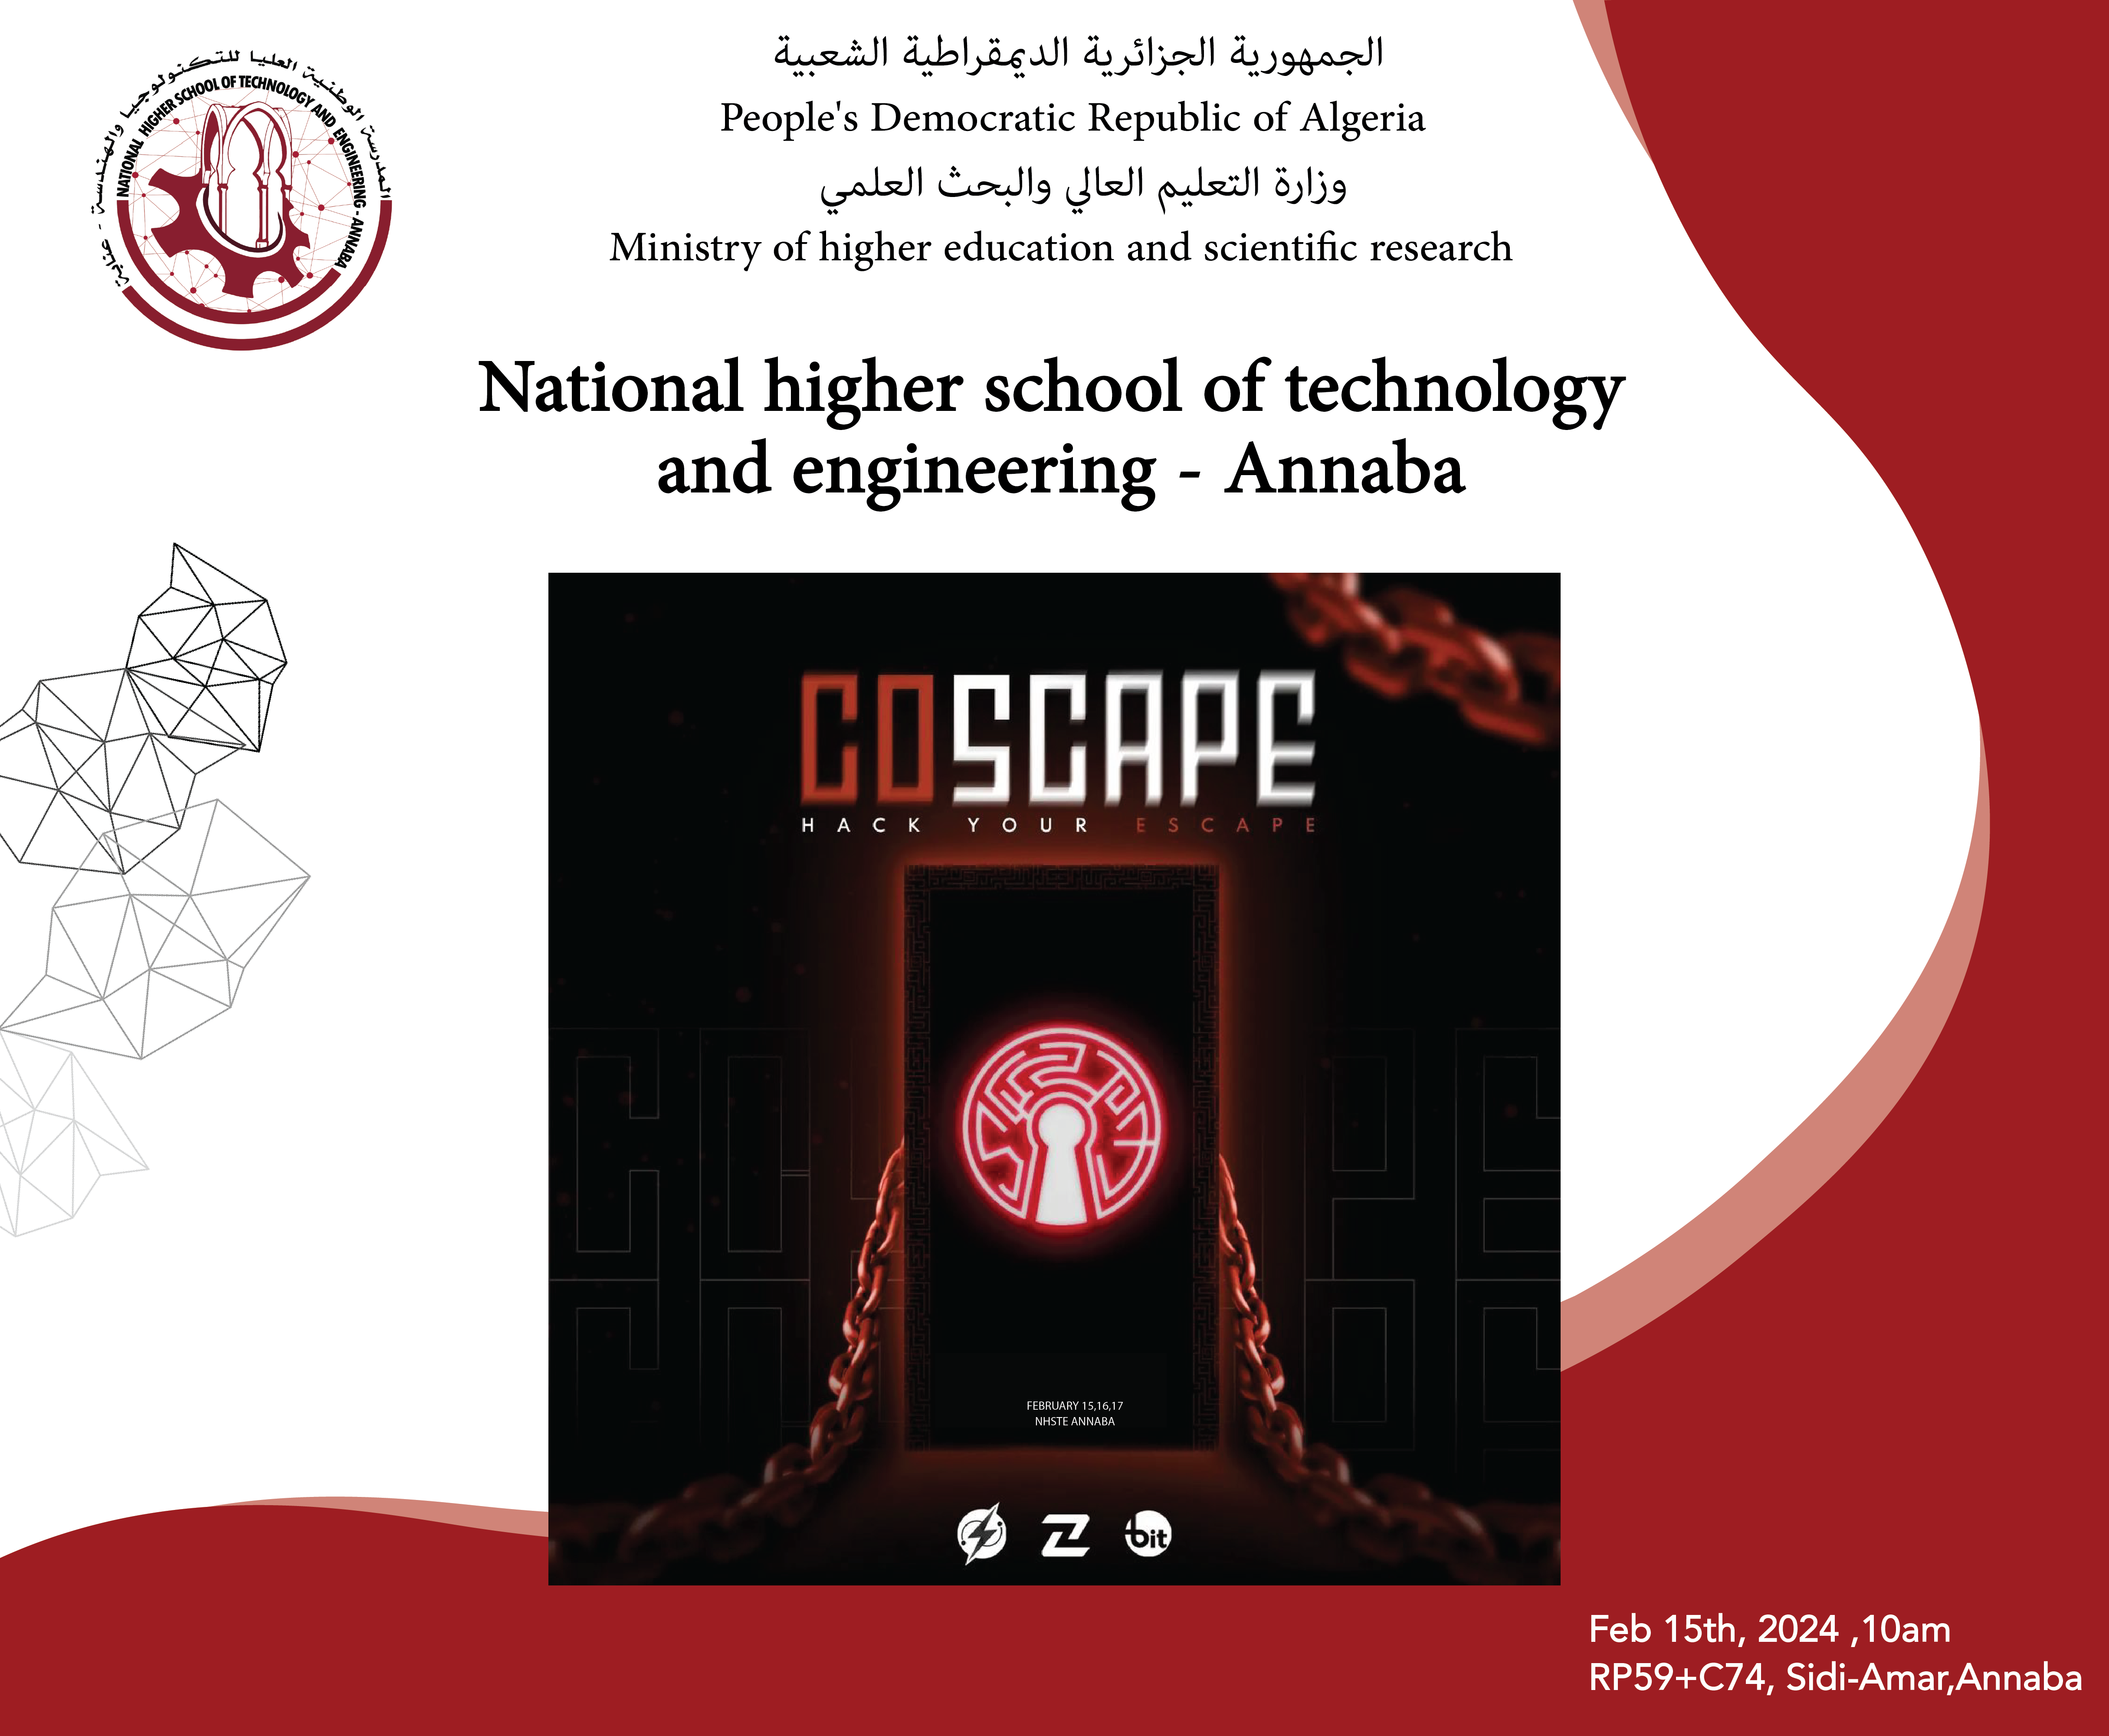 COSCAPE Competition Launches Today at Our School